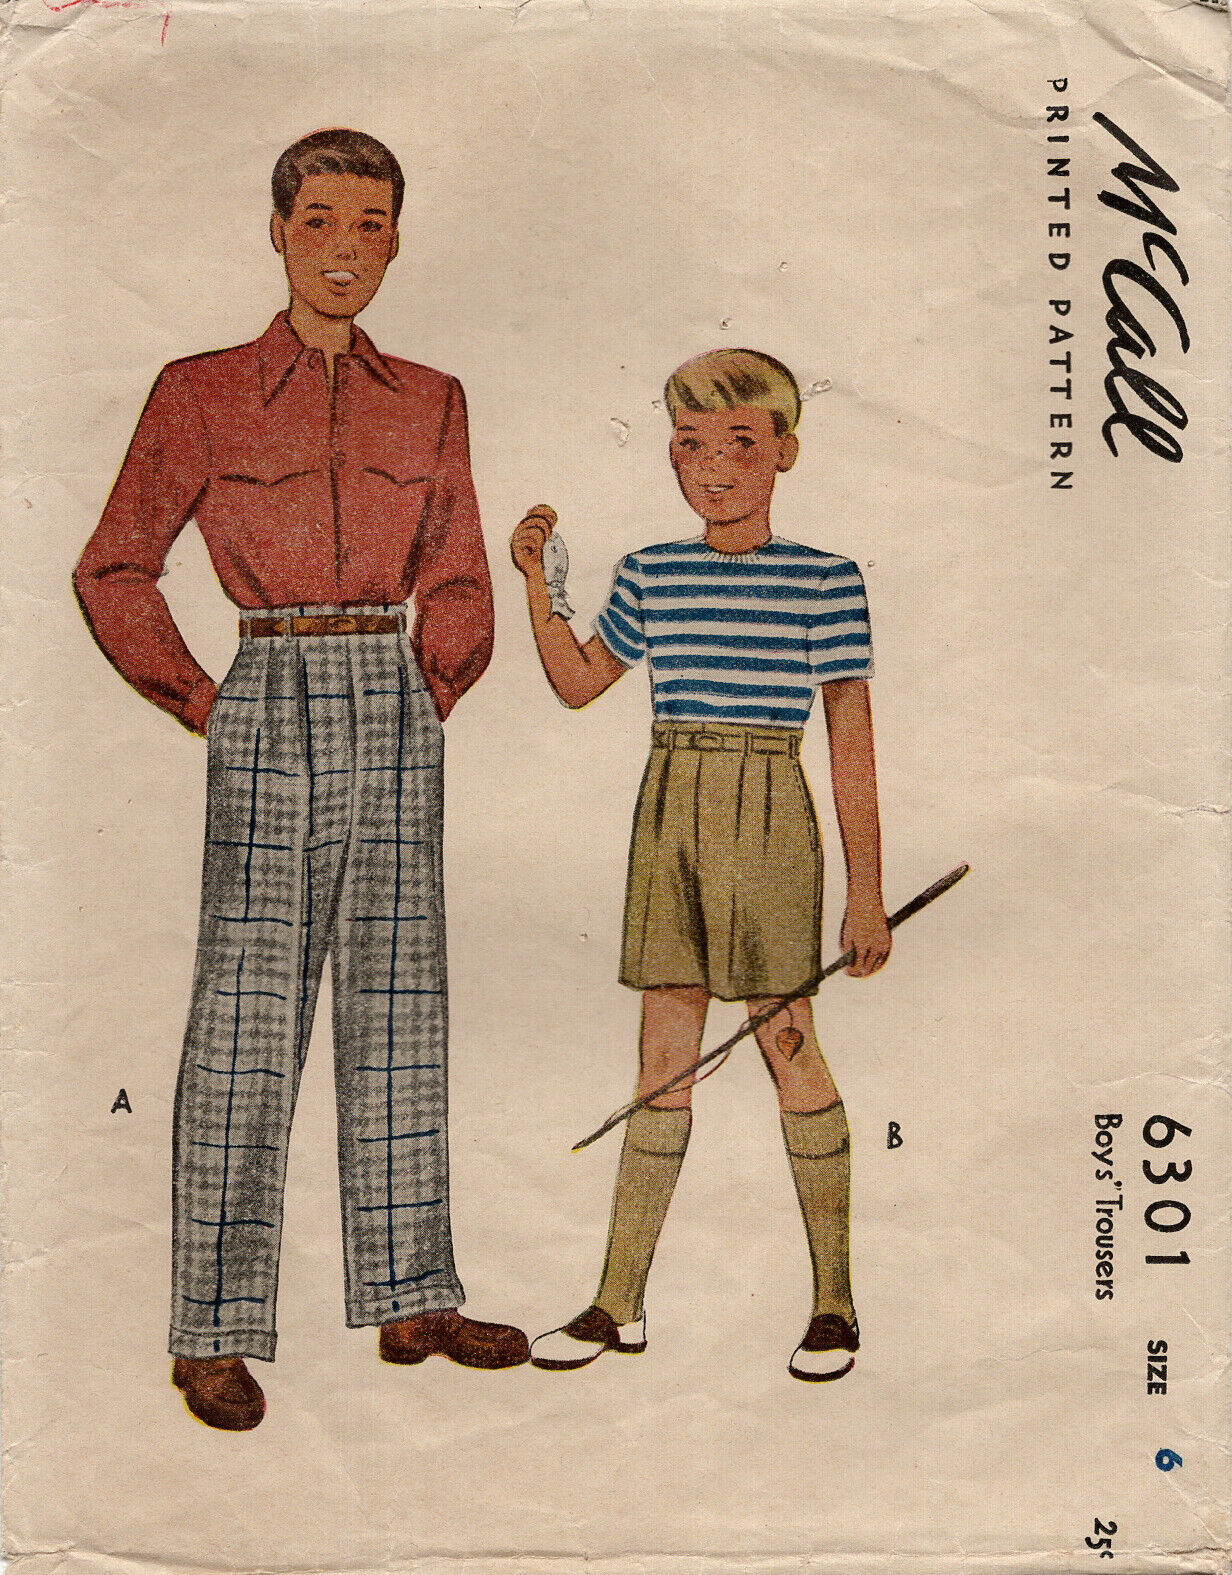 Mccall 6301 Boys' Trousers Or Shorts Sz 6 Cut Complete 1940s Post-wwii Era